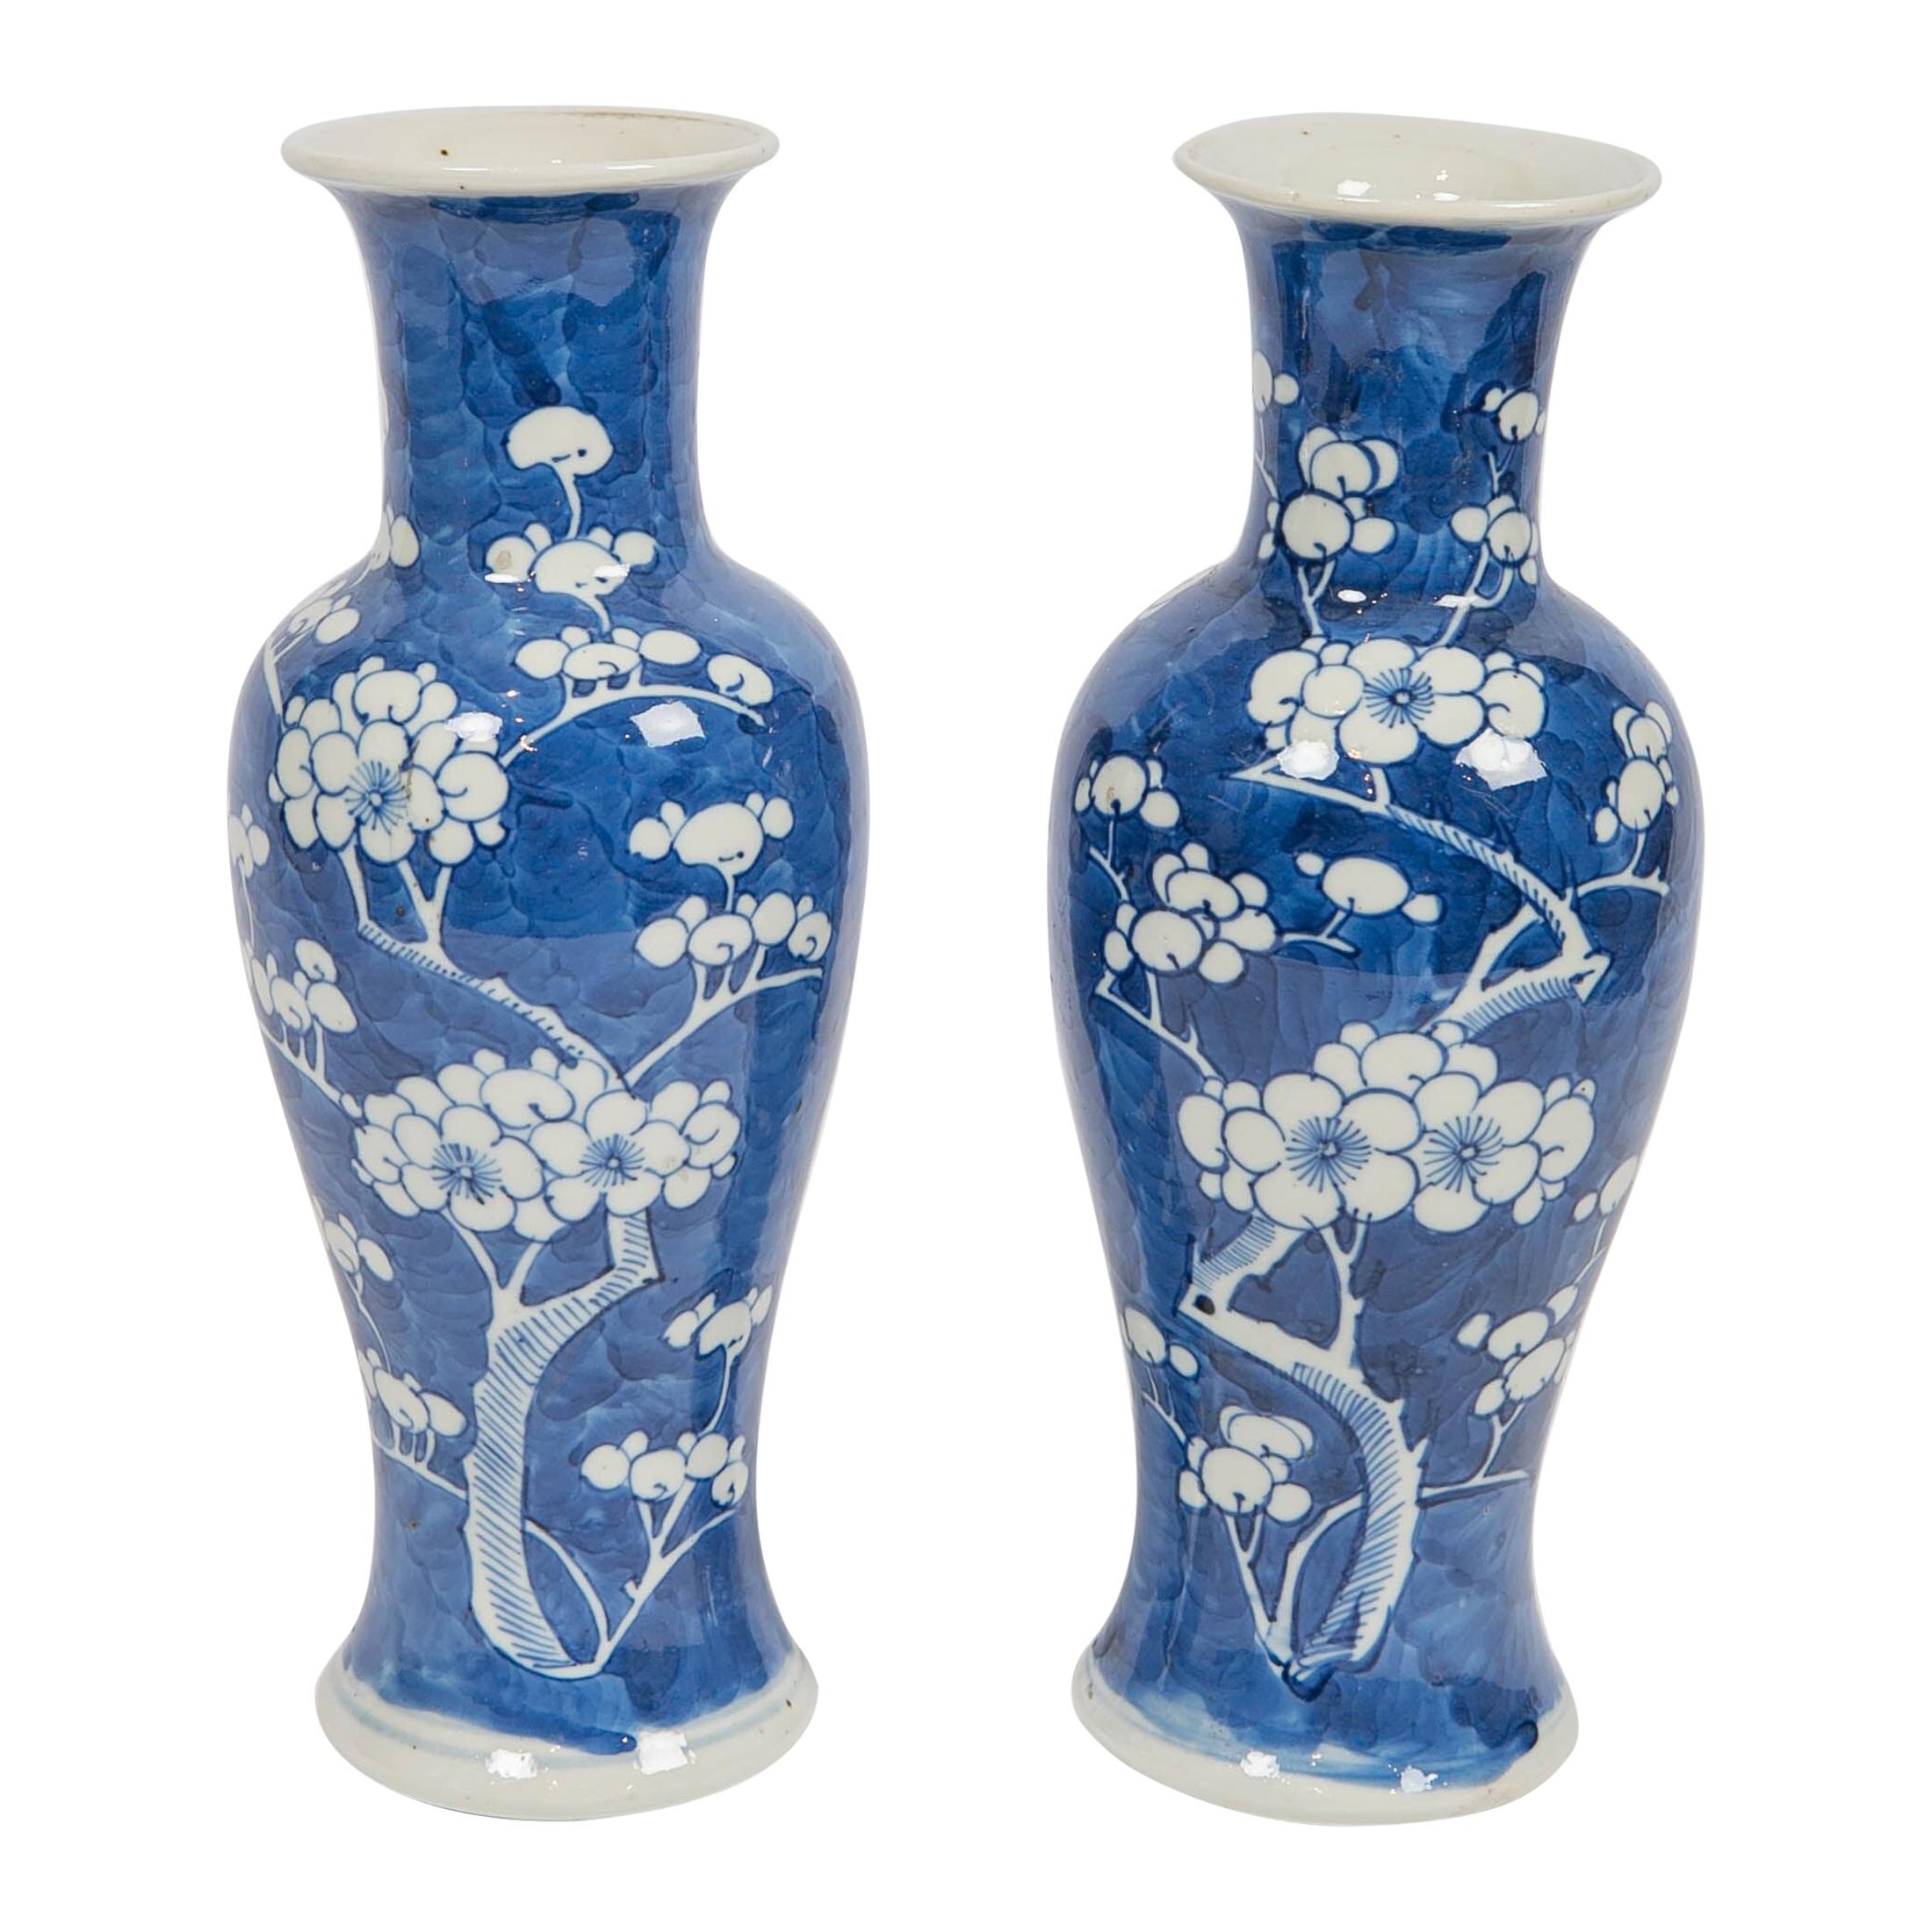 Antique Chinese Blue and White Porcelain Vases Made circa 1880